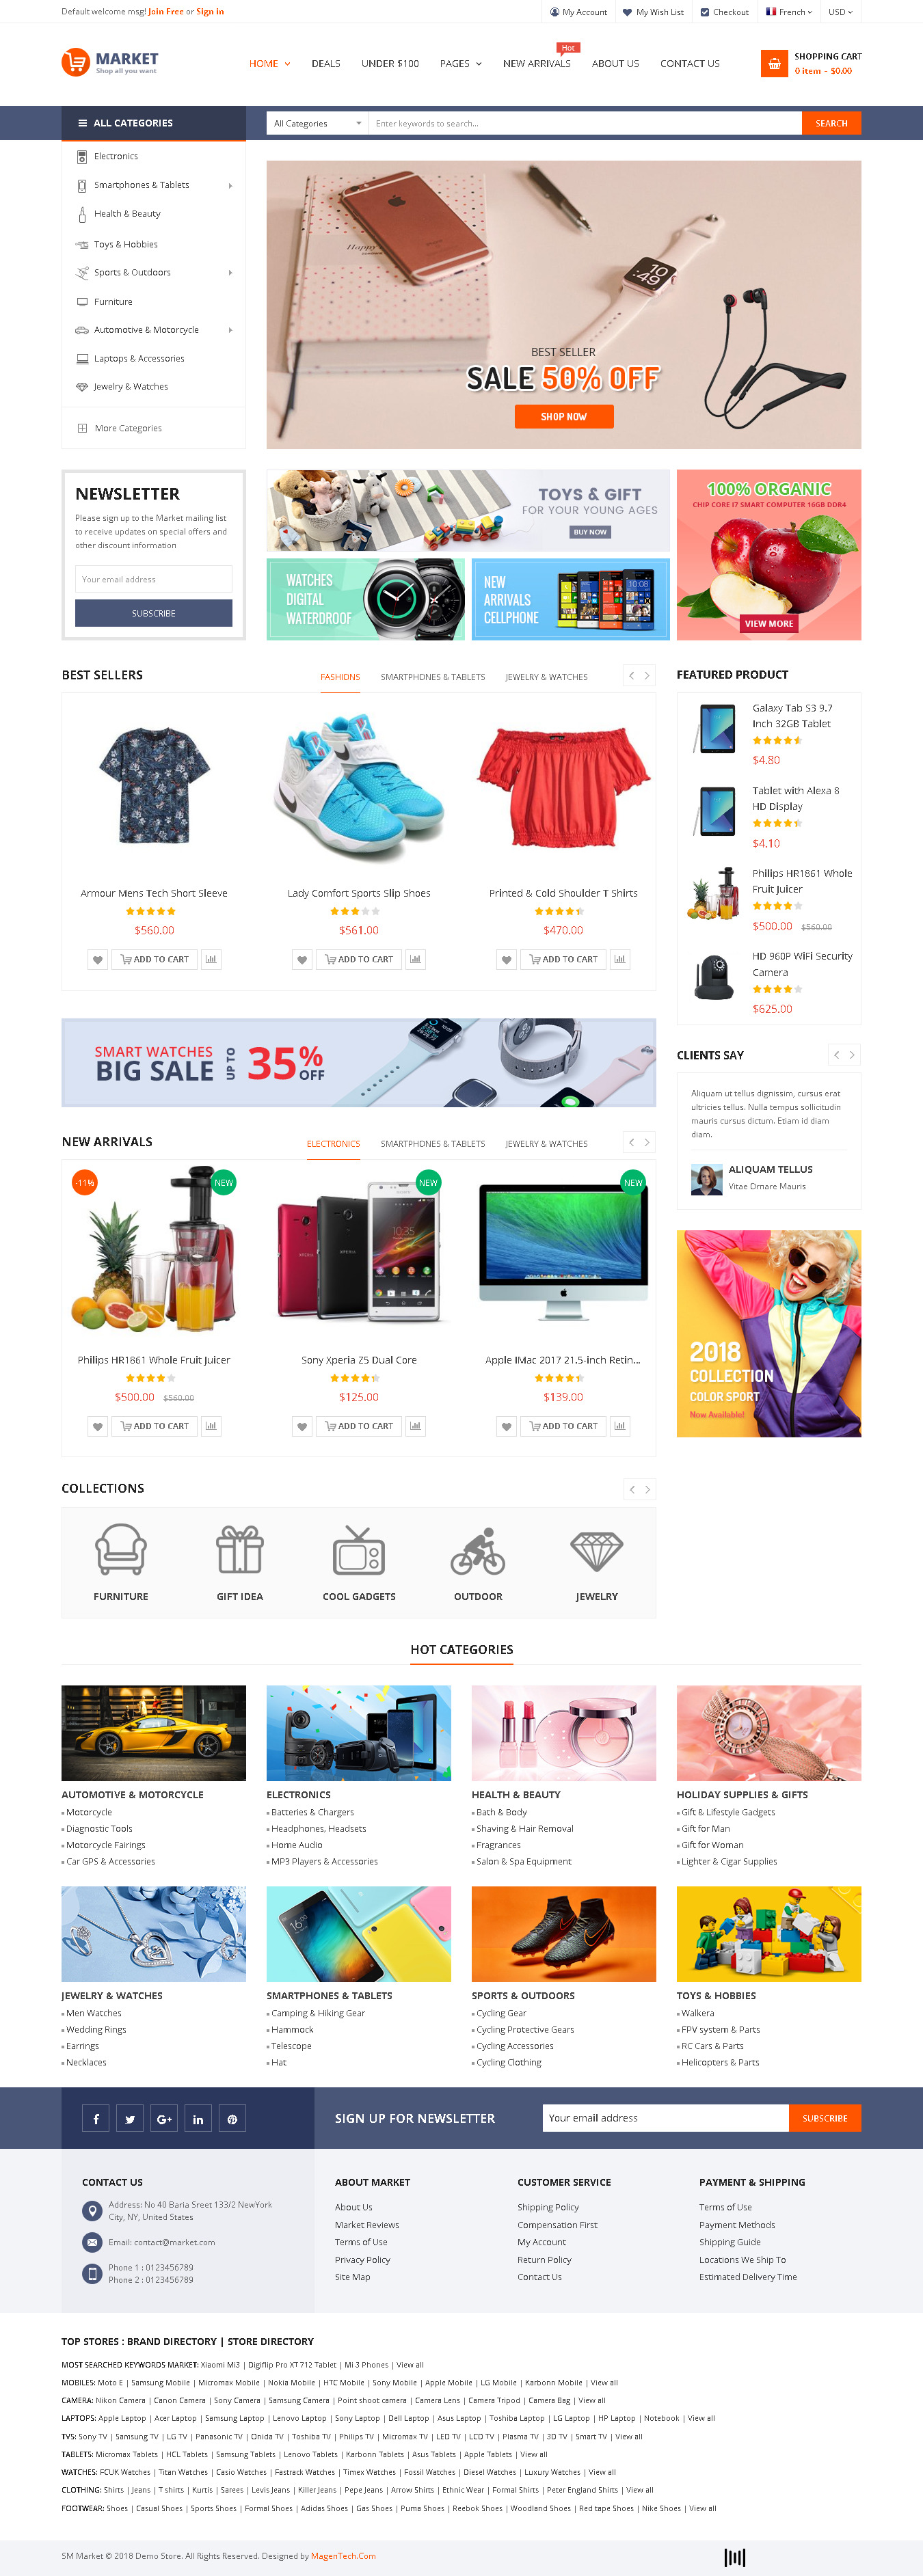 Top 5 Magento Themes for Large Inventory Stores - Market - Premium Responsive Magento 2 and 1.9 Store Theme